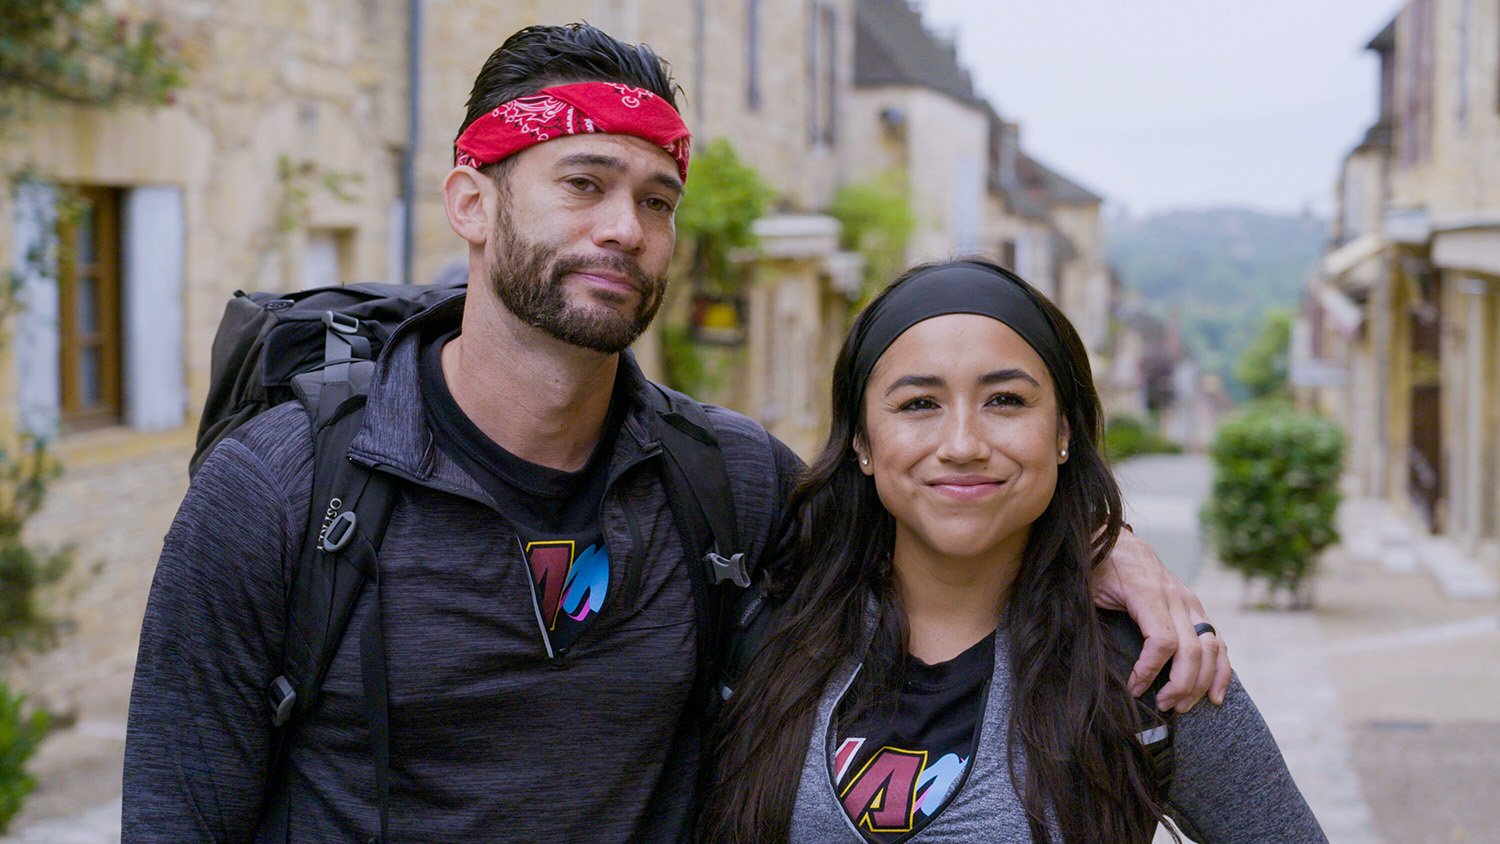 Luis Colon and Michelle Burgos pose together on The Amazing Race Season 34